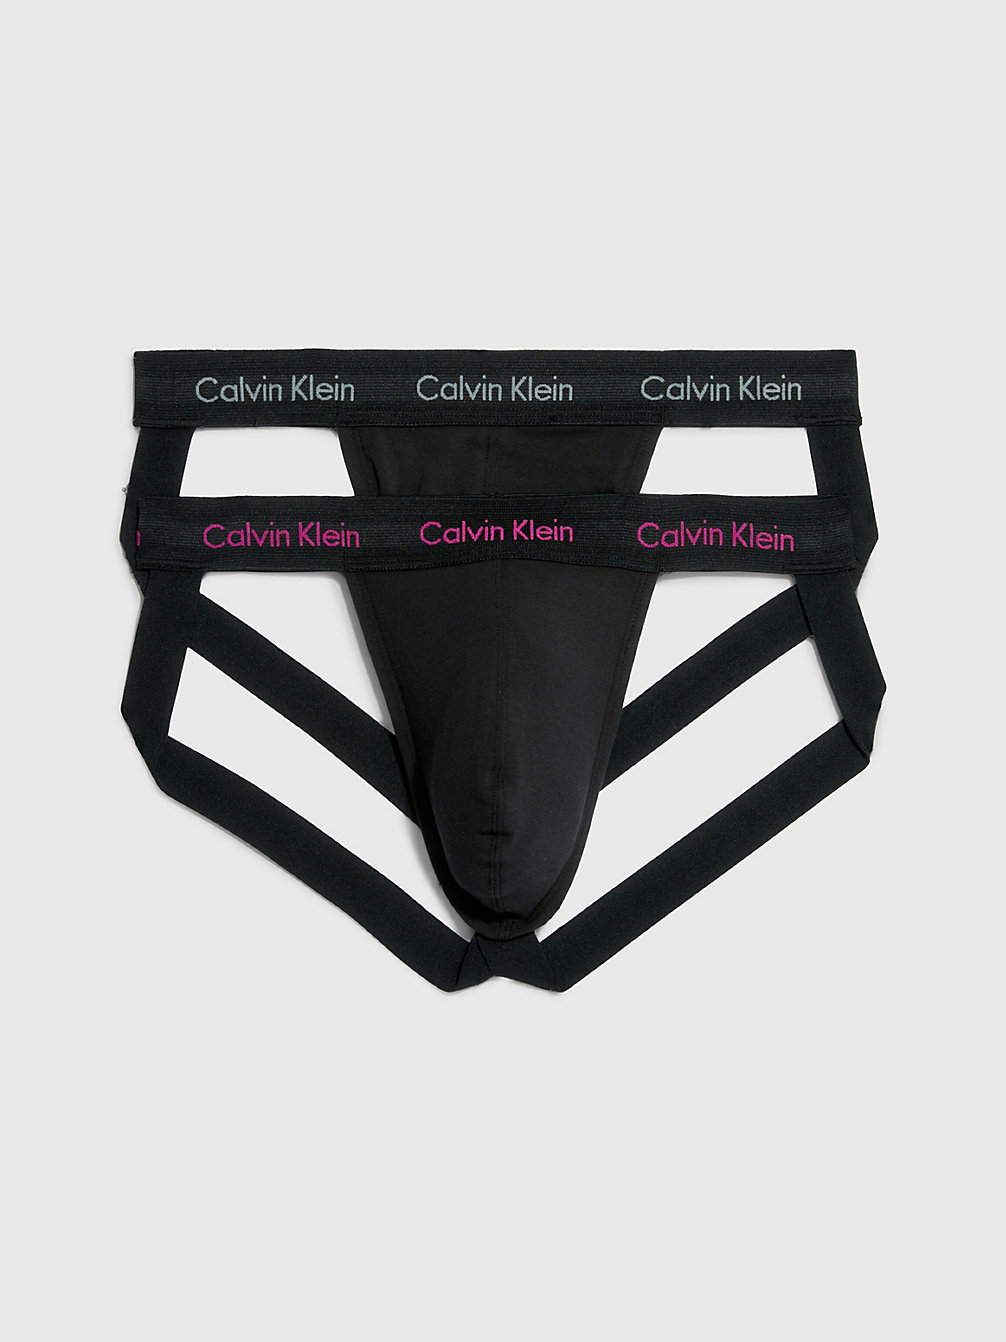 B-SILVER SPRINGS, PALACE PINK LOGO 2-Pack Jock Straps - Cotton Stretch undefined heren Calvin Klein